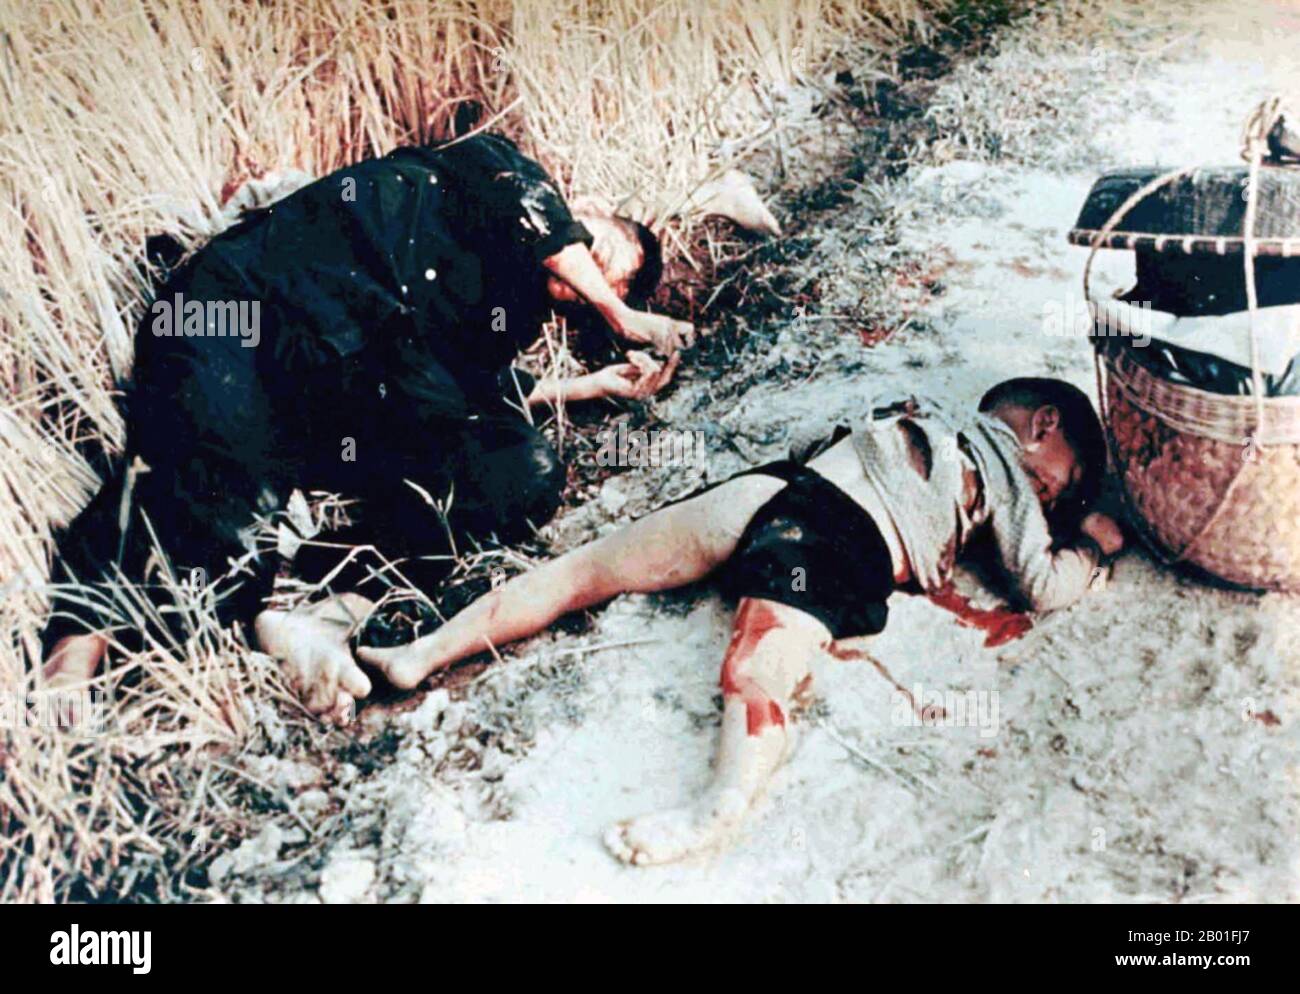 Vietnam: A male victim and child victim of the My Lai massacre or Thảm sát Mỹ Lai, March 6, 1868. Photo by Sgt. Ronald L. Haeberle.  The My Lai Massacre was the Vietnam War mass murder of 347–504 unarmed civilians in South Vietnam on March 16, 1968, by United States Army soldiers of 'Charlie' Company of 1st Battalion, 20th Infantry Regiment, 11th Brigade of the Americal Division.  Most of the victims were women, children (including babies), and elderly people. Many were raped, beaten, and tortured, and some of the bodies were later found to be mutilated. Stock Photo